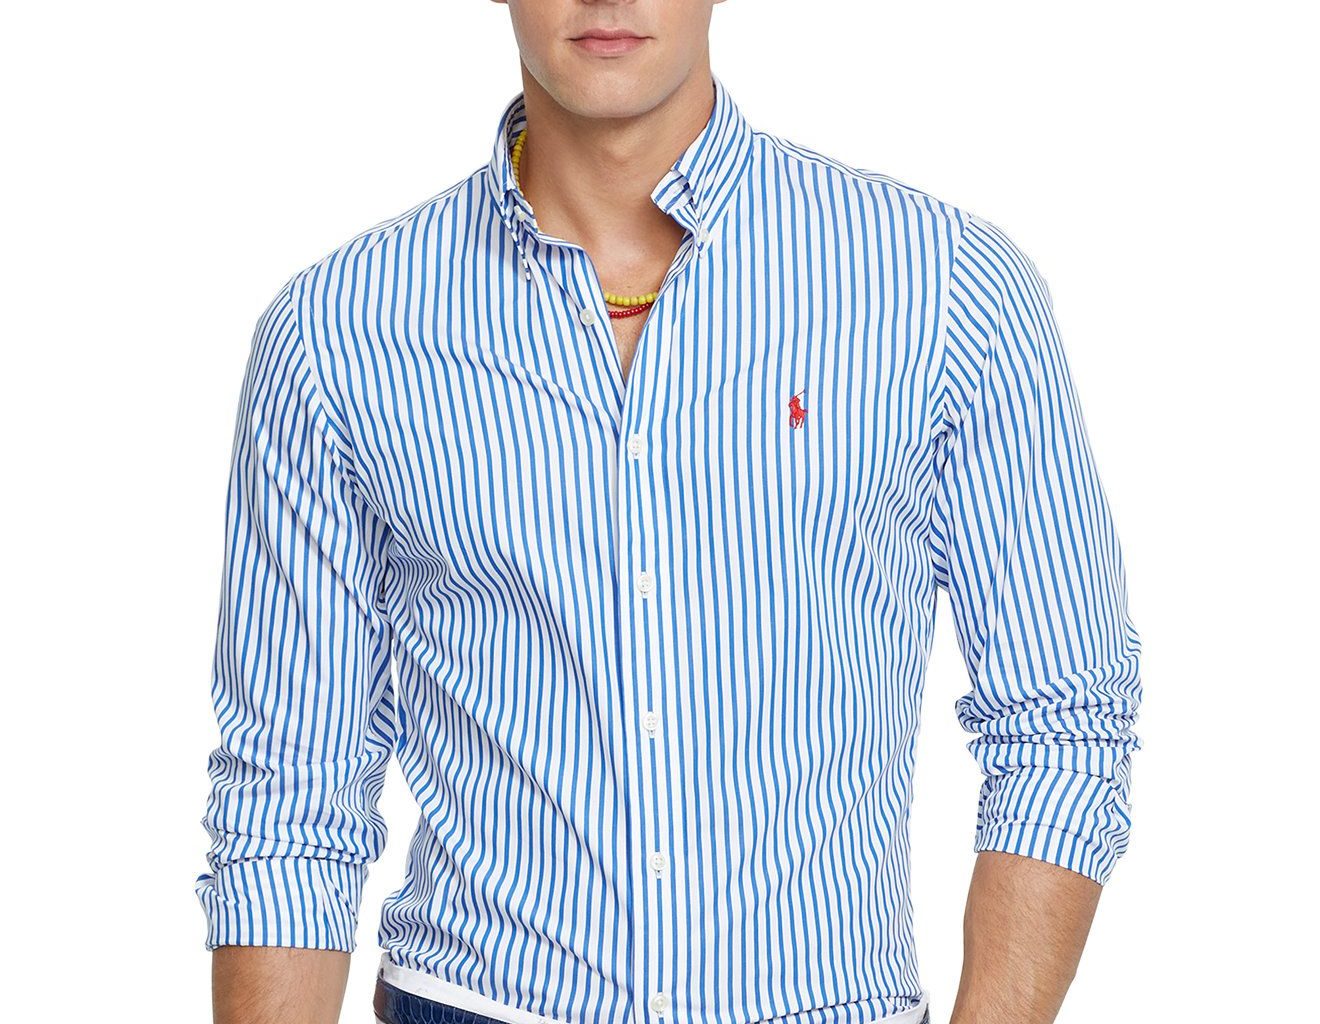 How to Find the Best Stripe Button Down Shirt